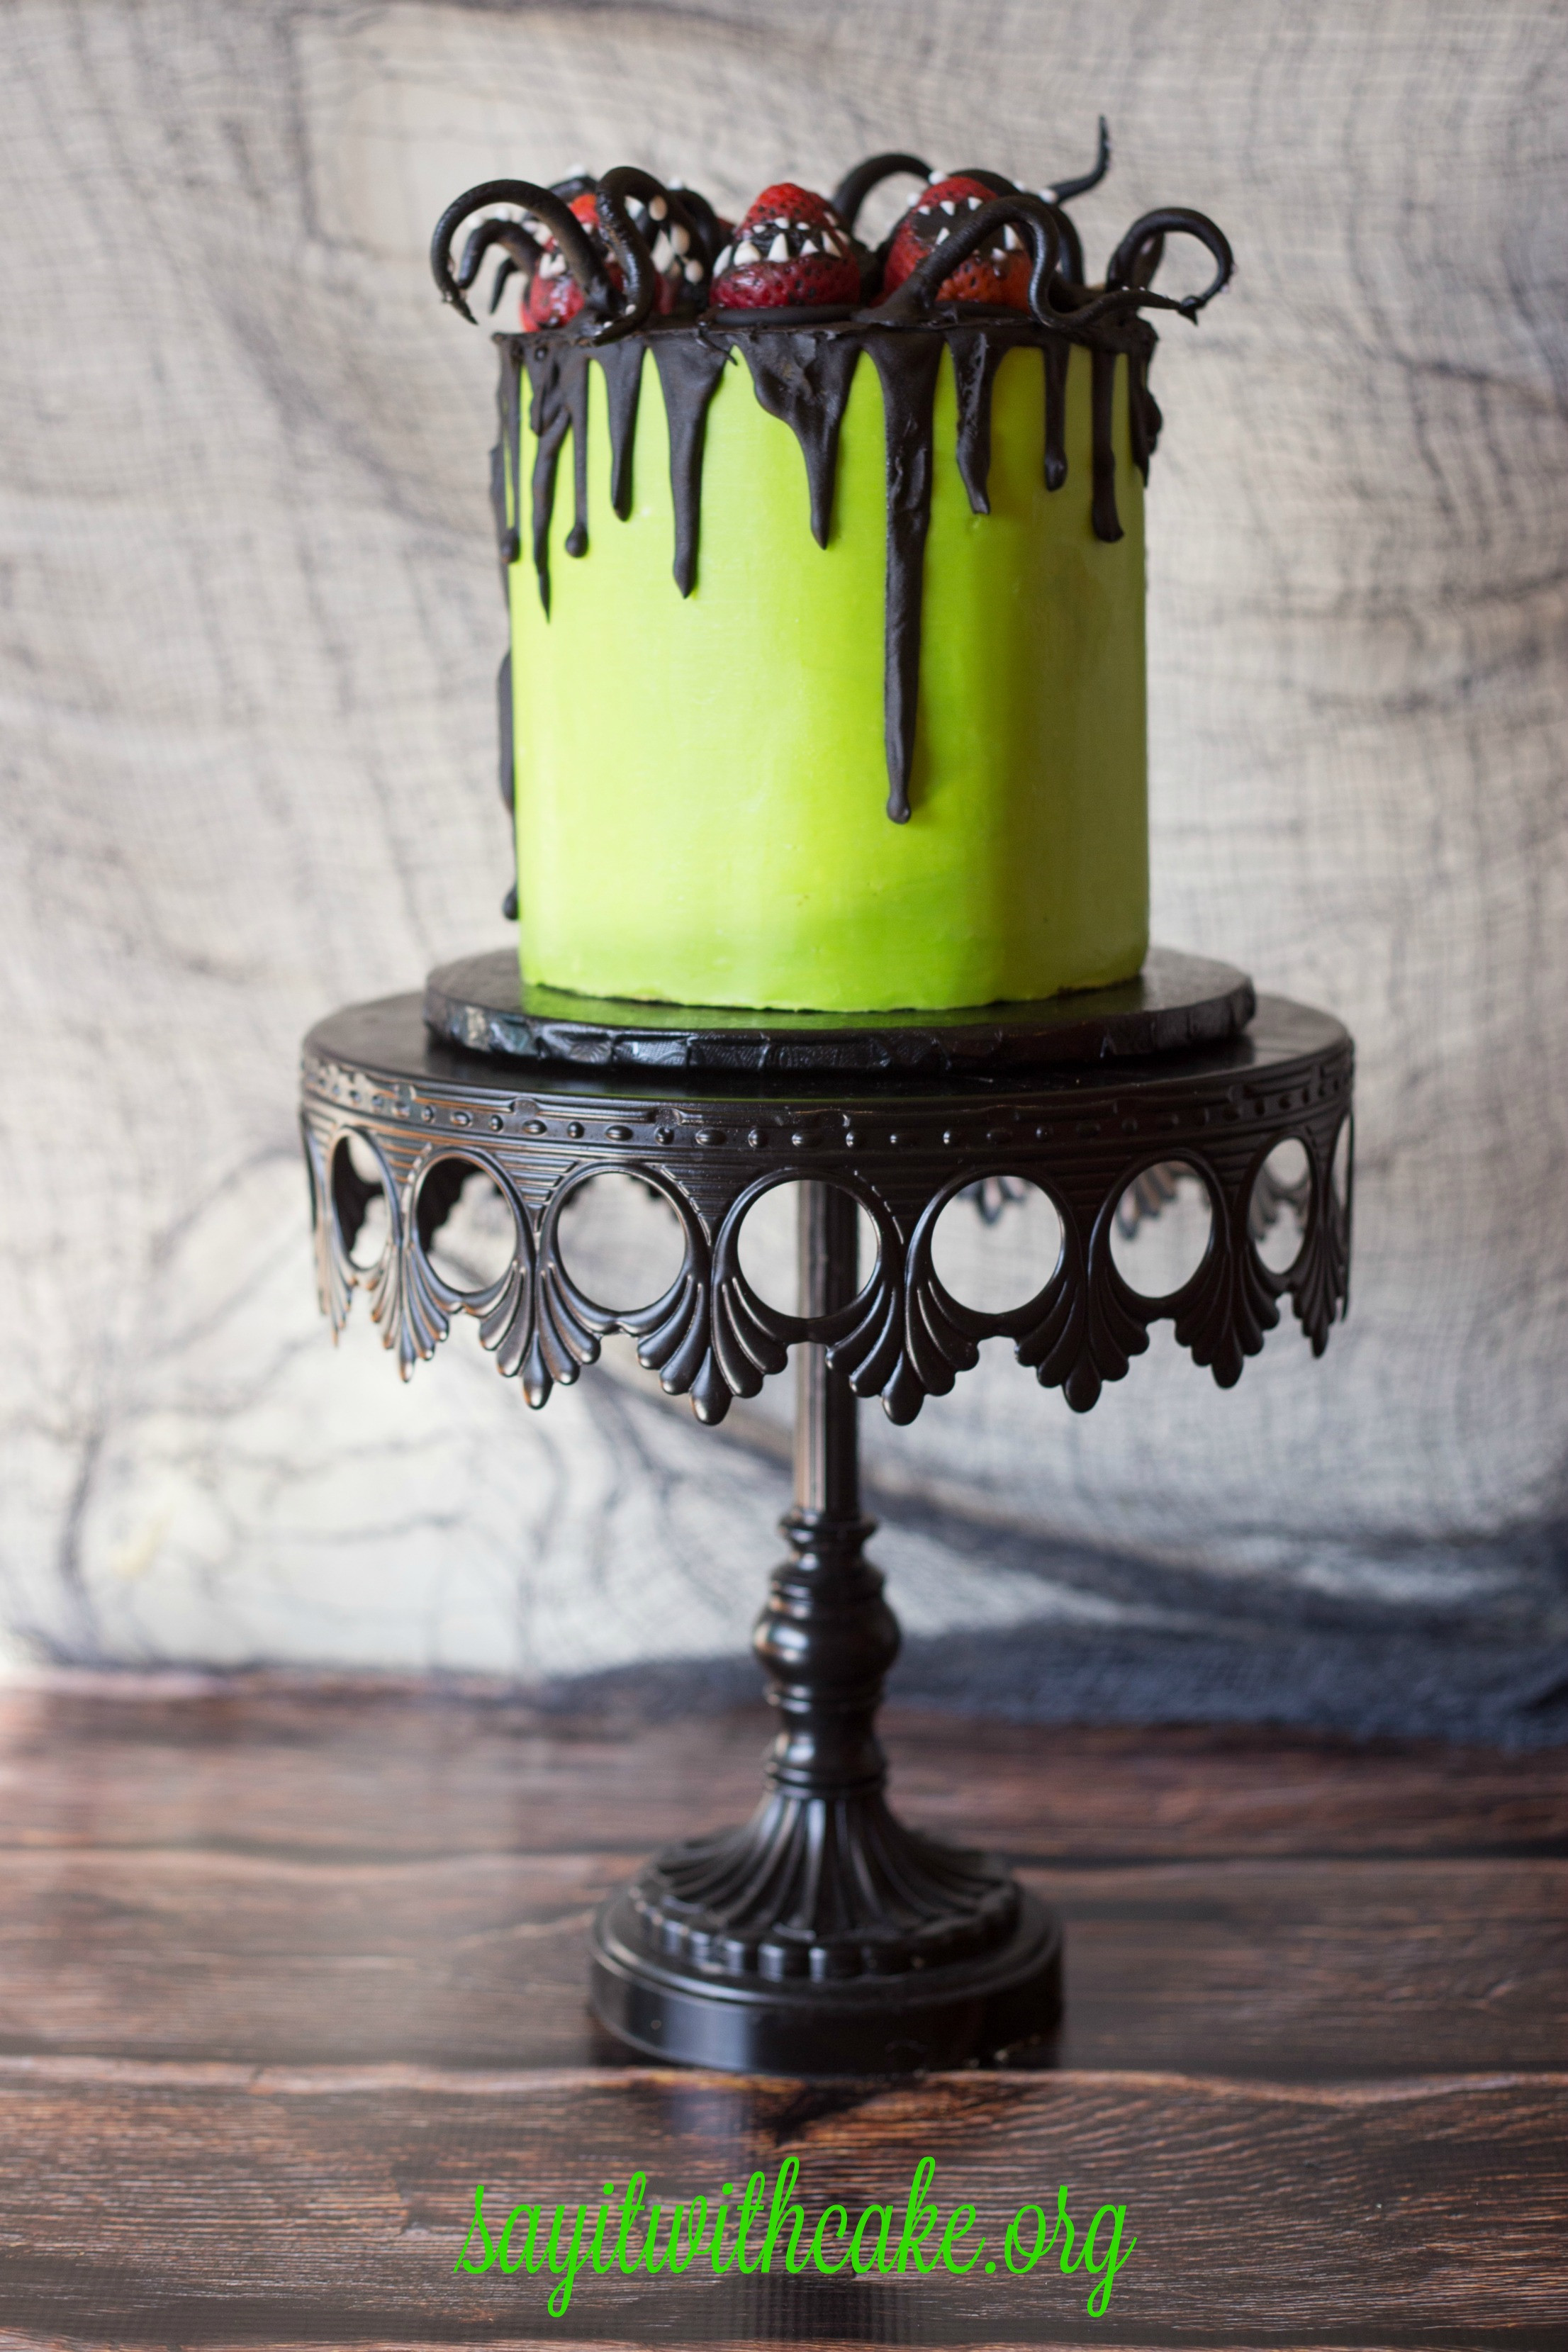 Creepy Halloween Cakes
 Creepy Halloween Cake – Say it With Cake